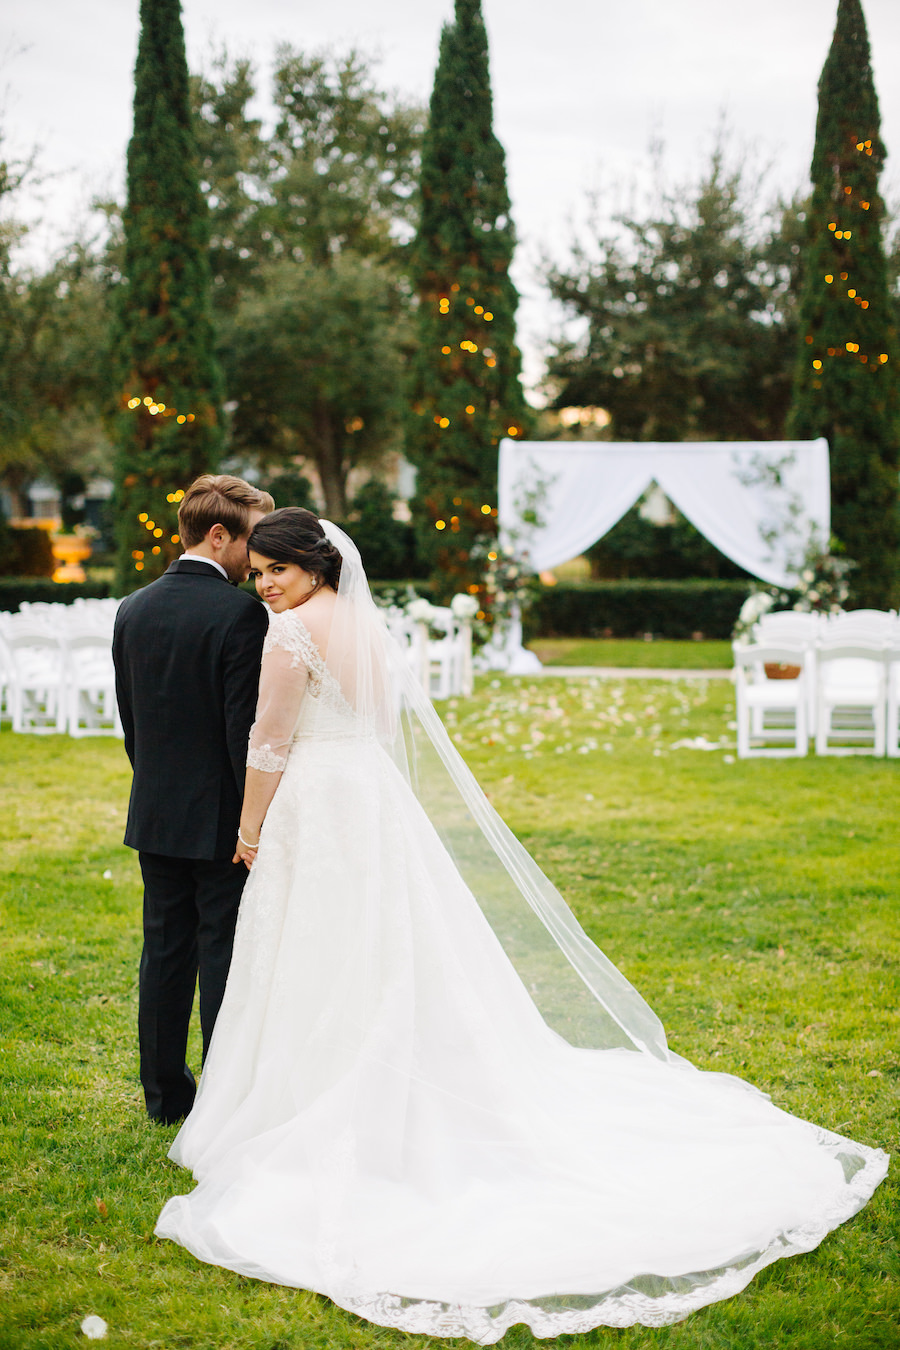 Bride and Groom Wedding Portrait at Garden Ceremony Venue The Palmetto Club with String Light Wrapped Trees, White Fabric Arch, and A Line Sophia Tolli Wedding Dress with Long Train and Veil | Tampa Bay Wedding